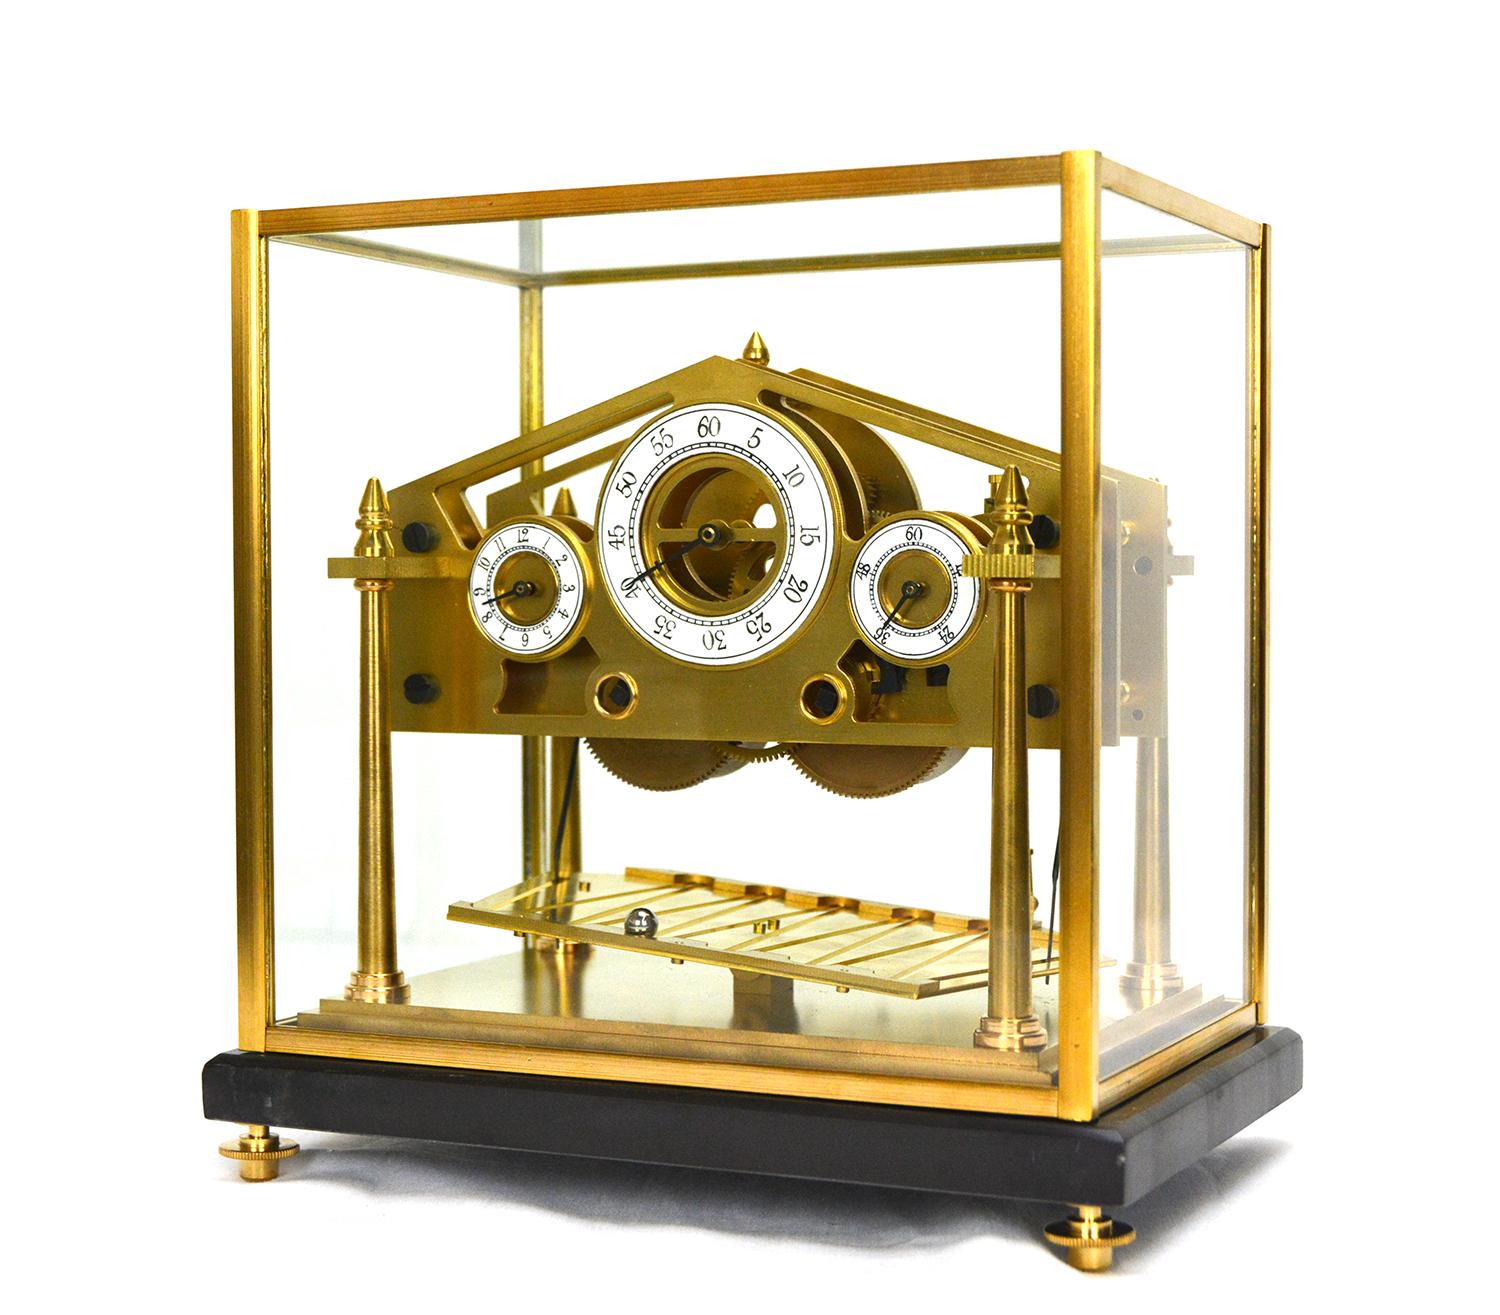 Here is a beautiful miniature Congreve rolling ball clock. This one comes with a solid marble display base and protective dome. The glass dome has solid brass frames. The clock is made of heavy solid brass. The time shows on 3 separated porcelain